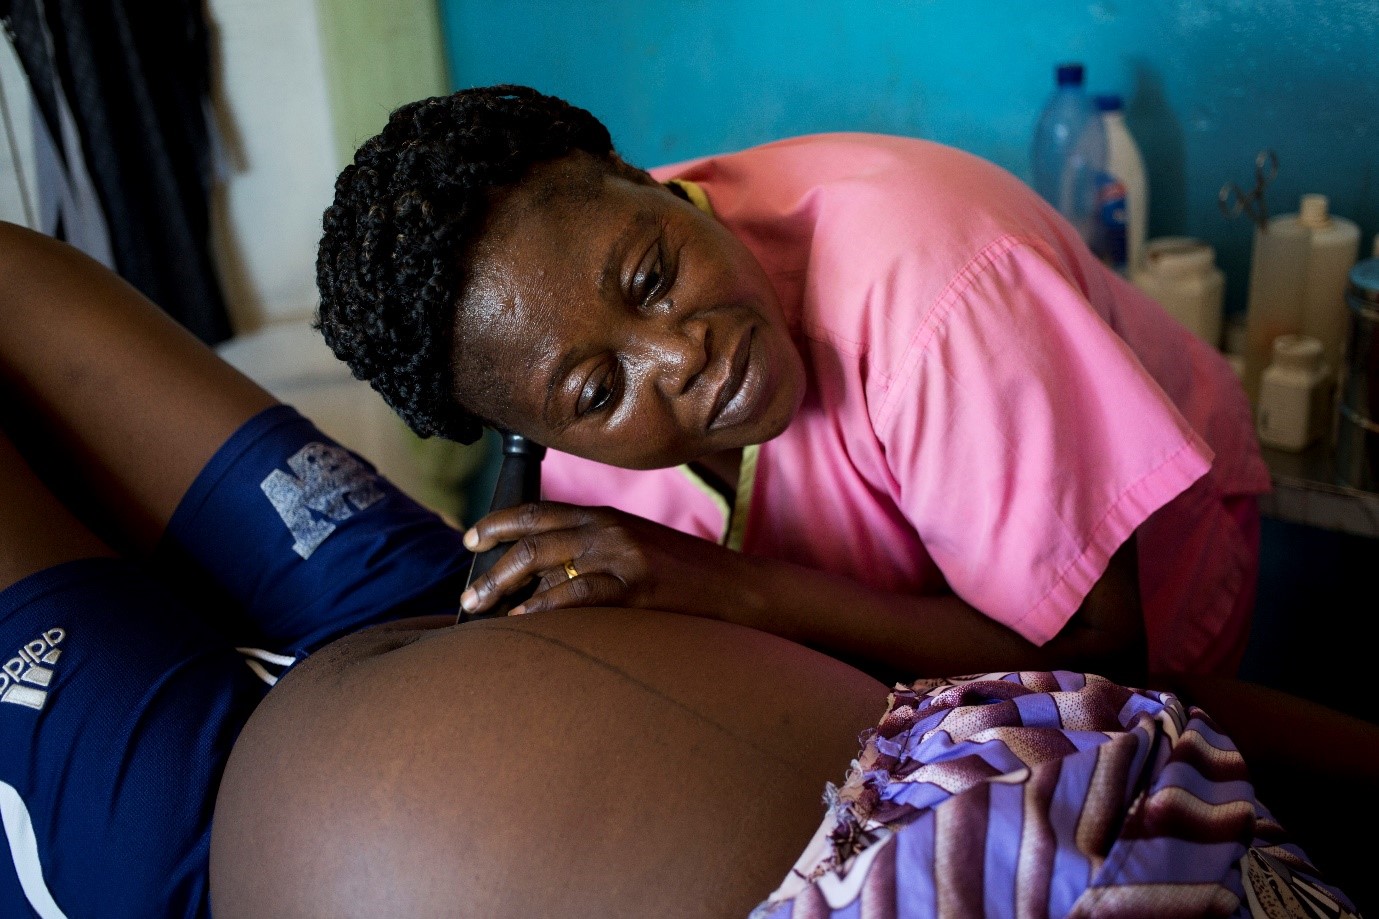 Antenatal care nurse Chantal examines Christella, an expectant mother, in Kenge, DRC. Christella was referred to the health center by a TIPTOP community health worker to ensure a healthy pregnancy (Credit: Karel Prinsloo / Jhpiego).